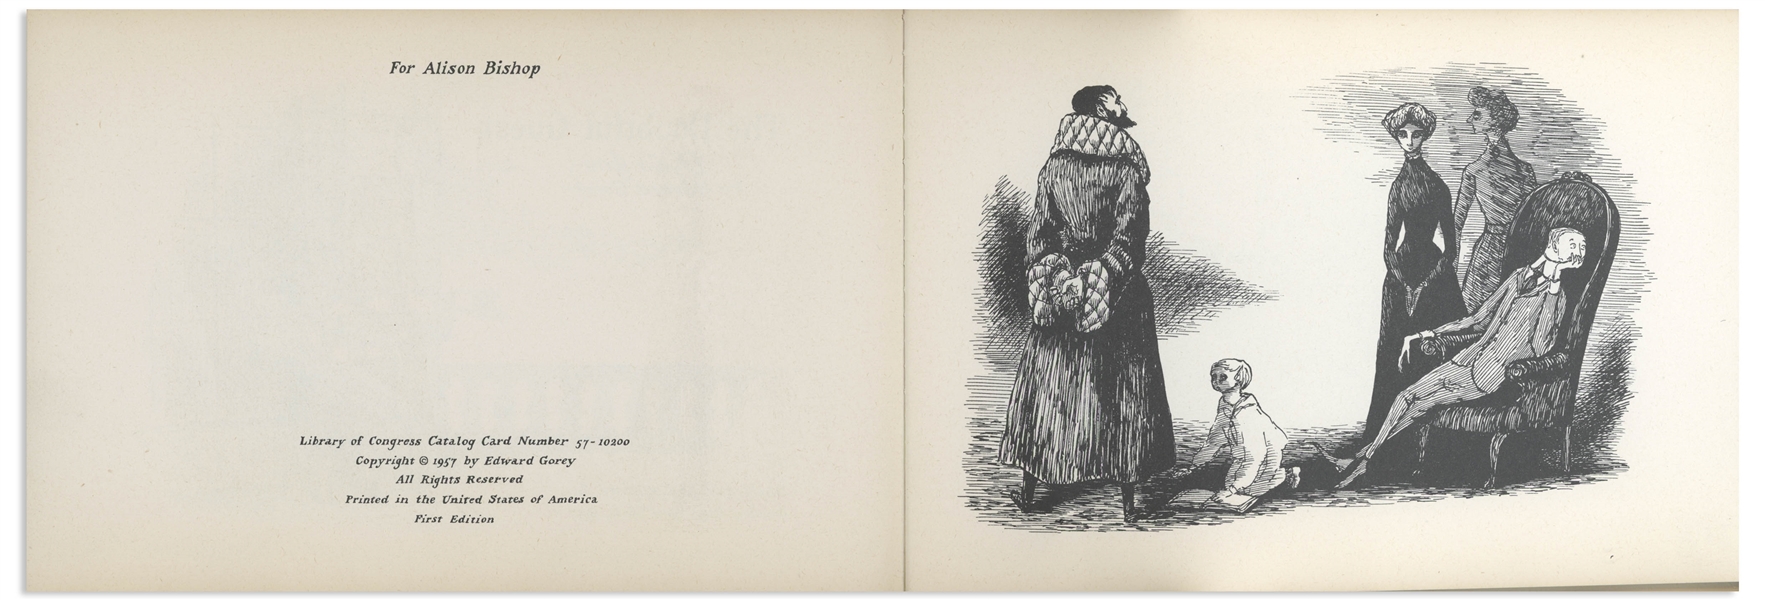 Edward Gorey Signed First Edition of His 1957 Book ''The Doubtful Guest''